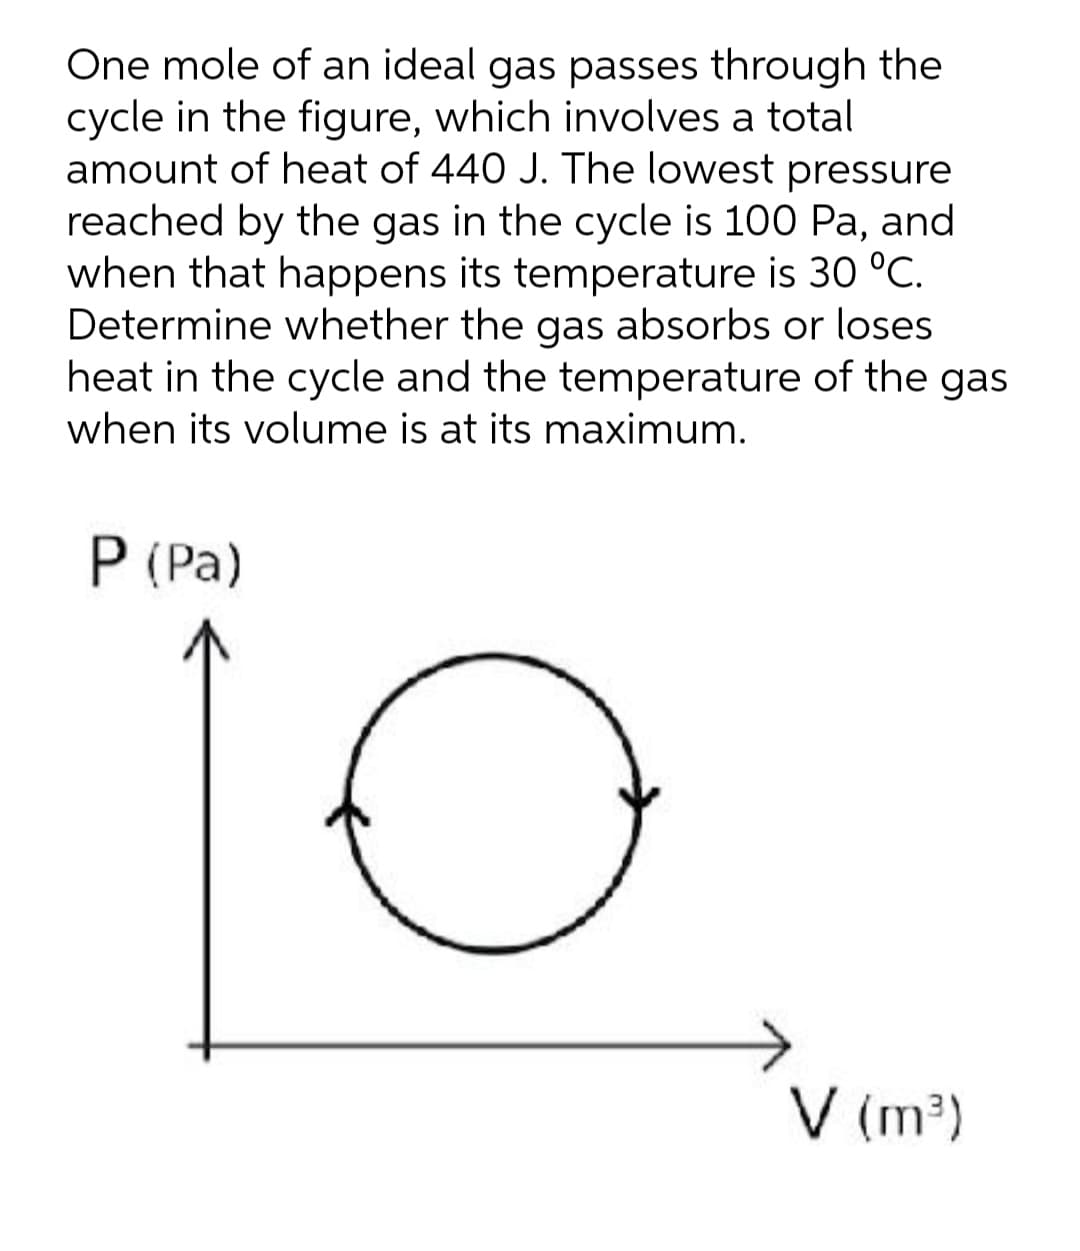 One mole of an ideal gas passes through the
cycle in the figure, which involves a total
amount of heat of 440 J. The lowest pressure
reached by the gas in the cycle is 100 Pa, and
when that happens its temperature is 30 °C.
Determine whether the gas absorbs or loses
heat in the cycle and the temperature of the gas
when its volume is at its maximum.
P (Pa)
V (m³)
